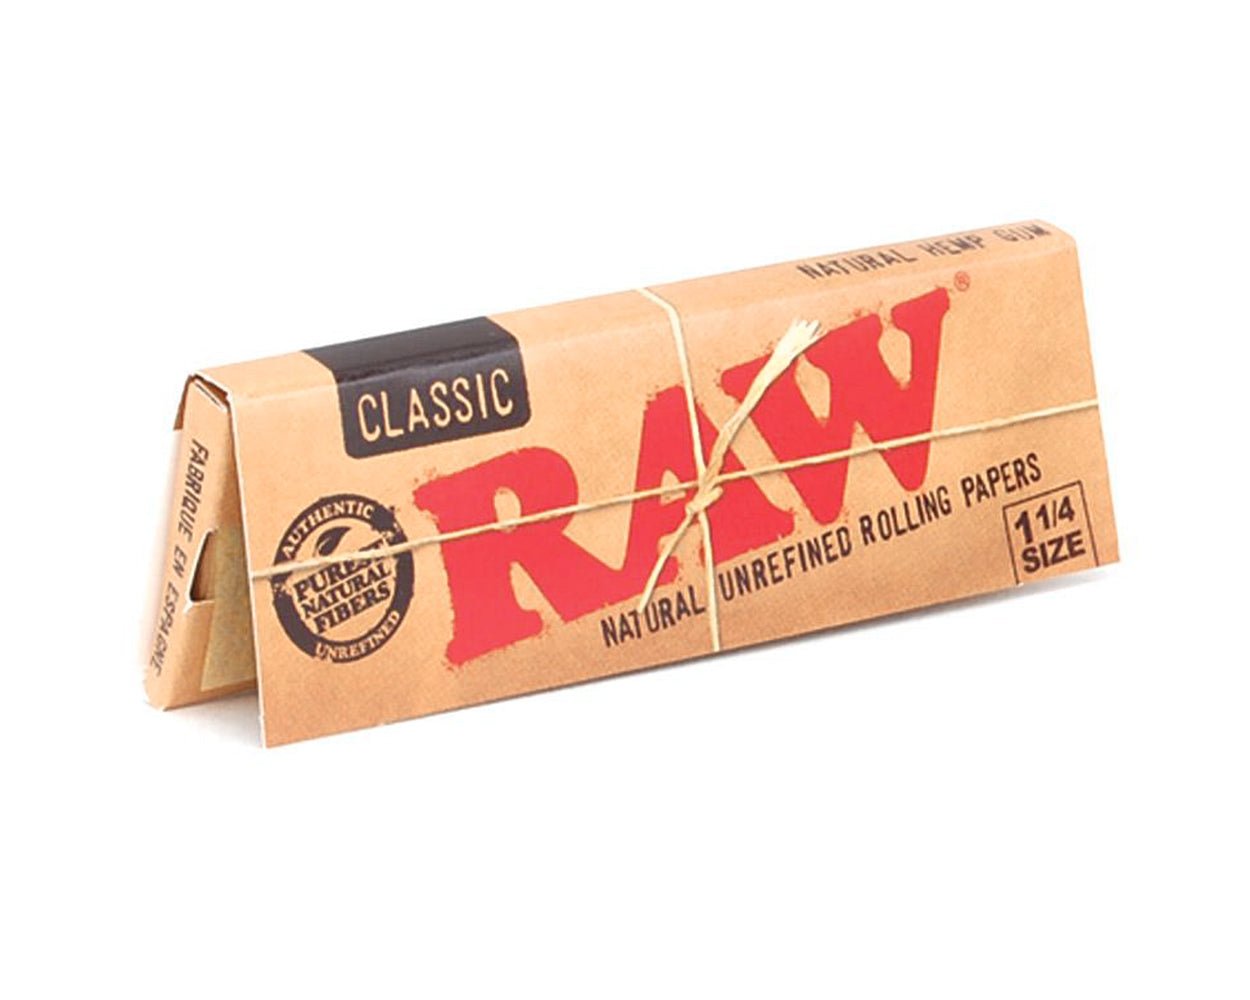 RAW Rolling Papers • The Natural Way To Roll •